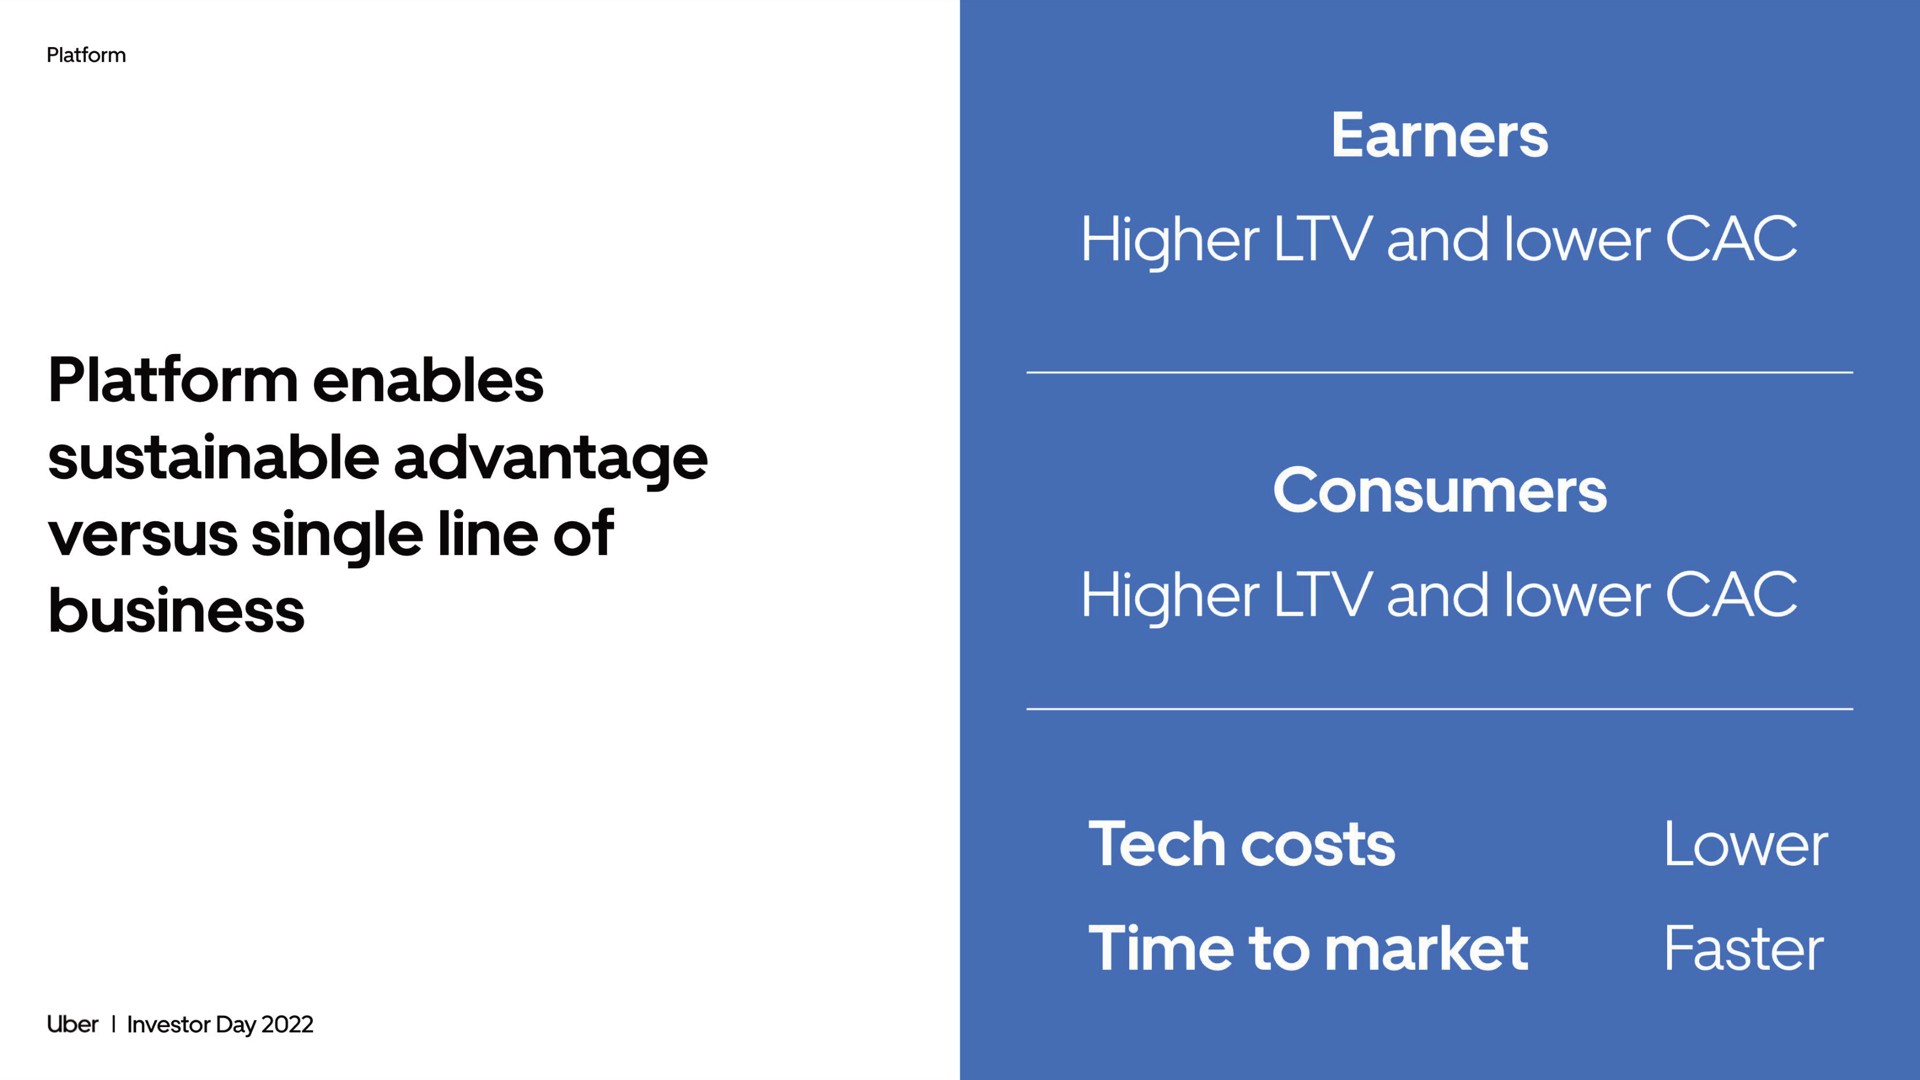 platform enables sustainable advantage versus single line of business earners higher and lower consumers higher and lower faster time to market tech costs lower | Uber